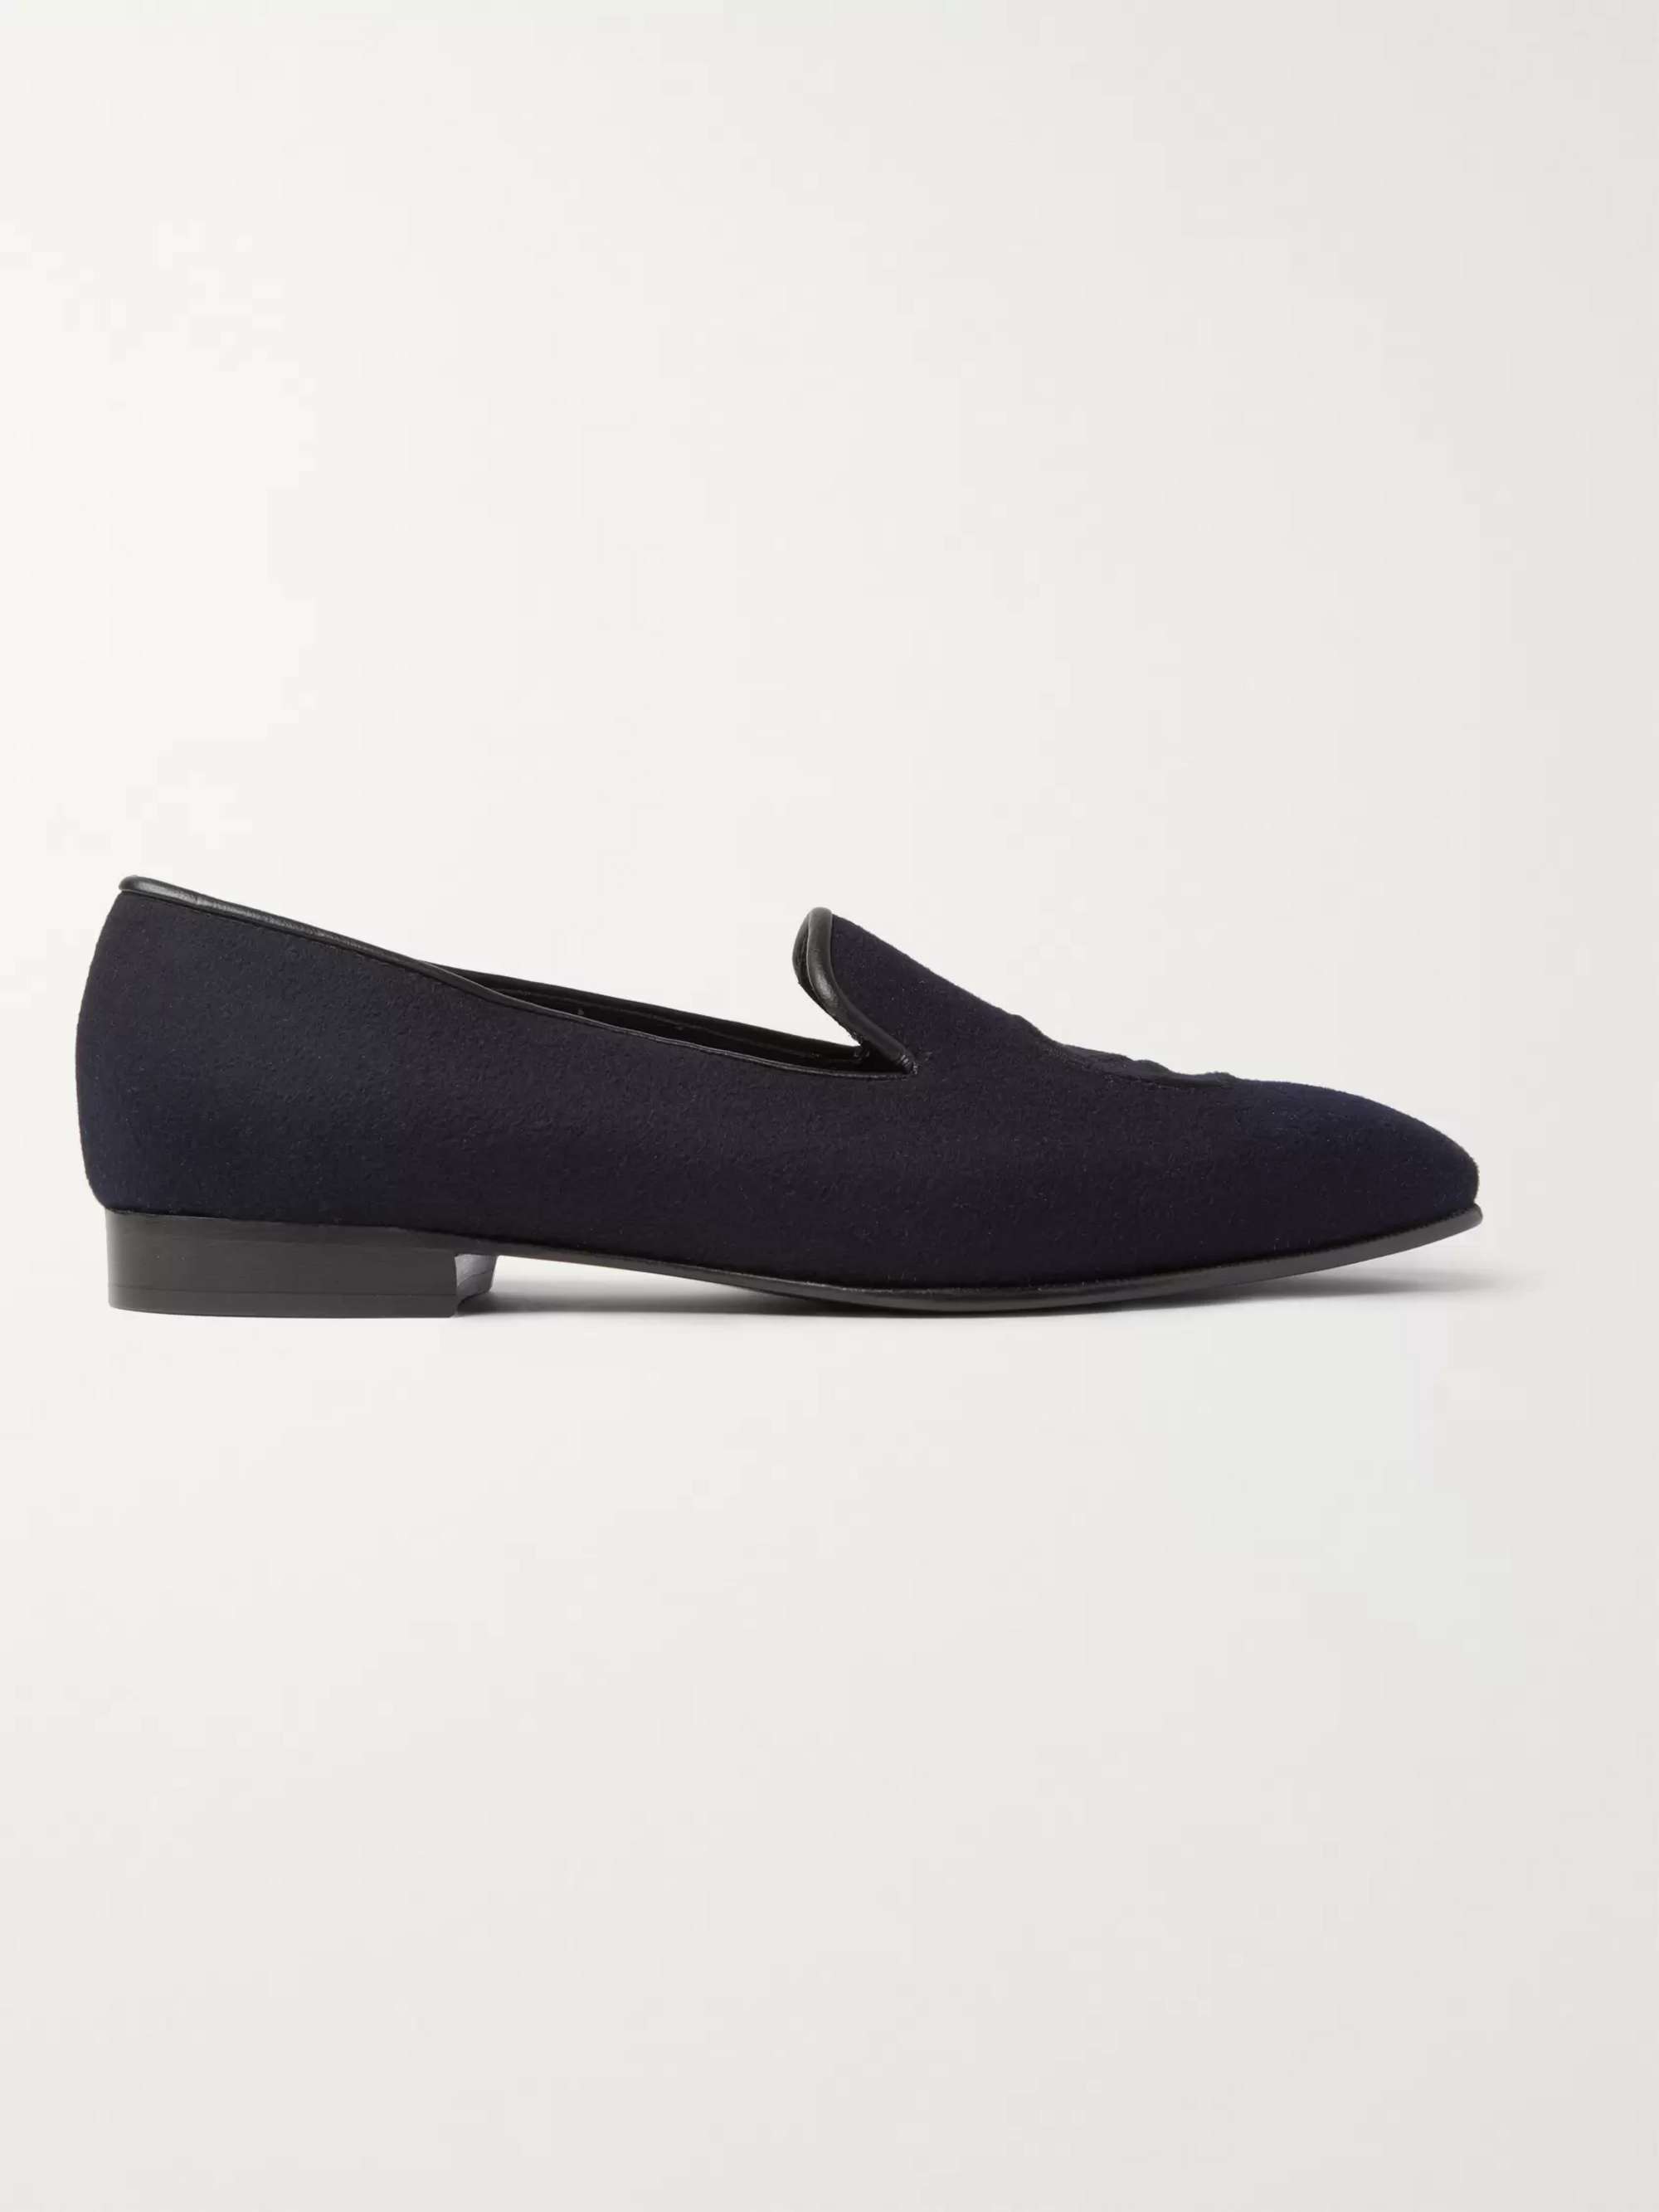 KINGSMAN + George Cleverley Windsor Leather-Trimmed Embroidered Cashmere Slippers